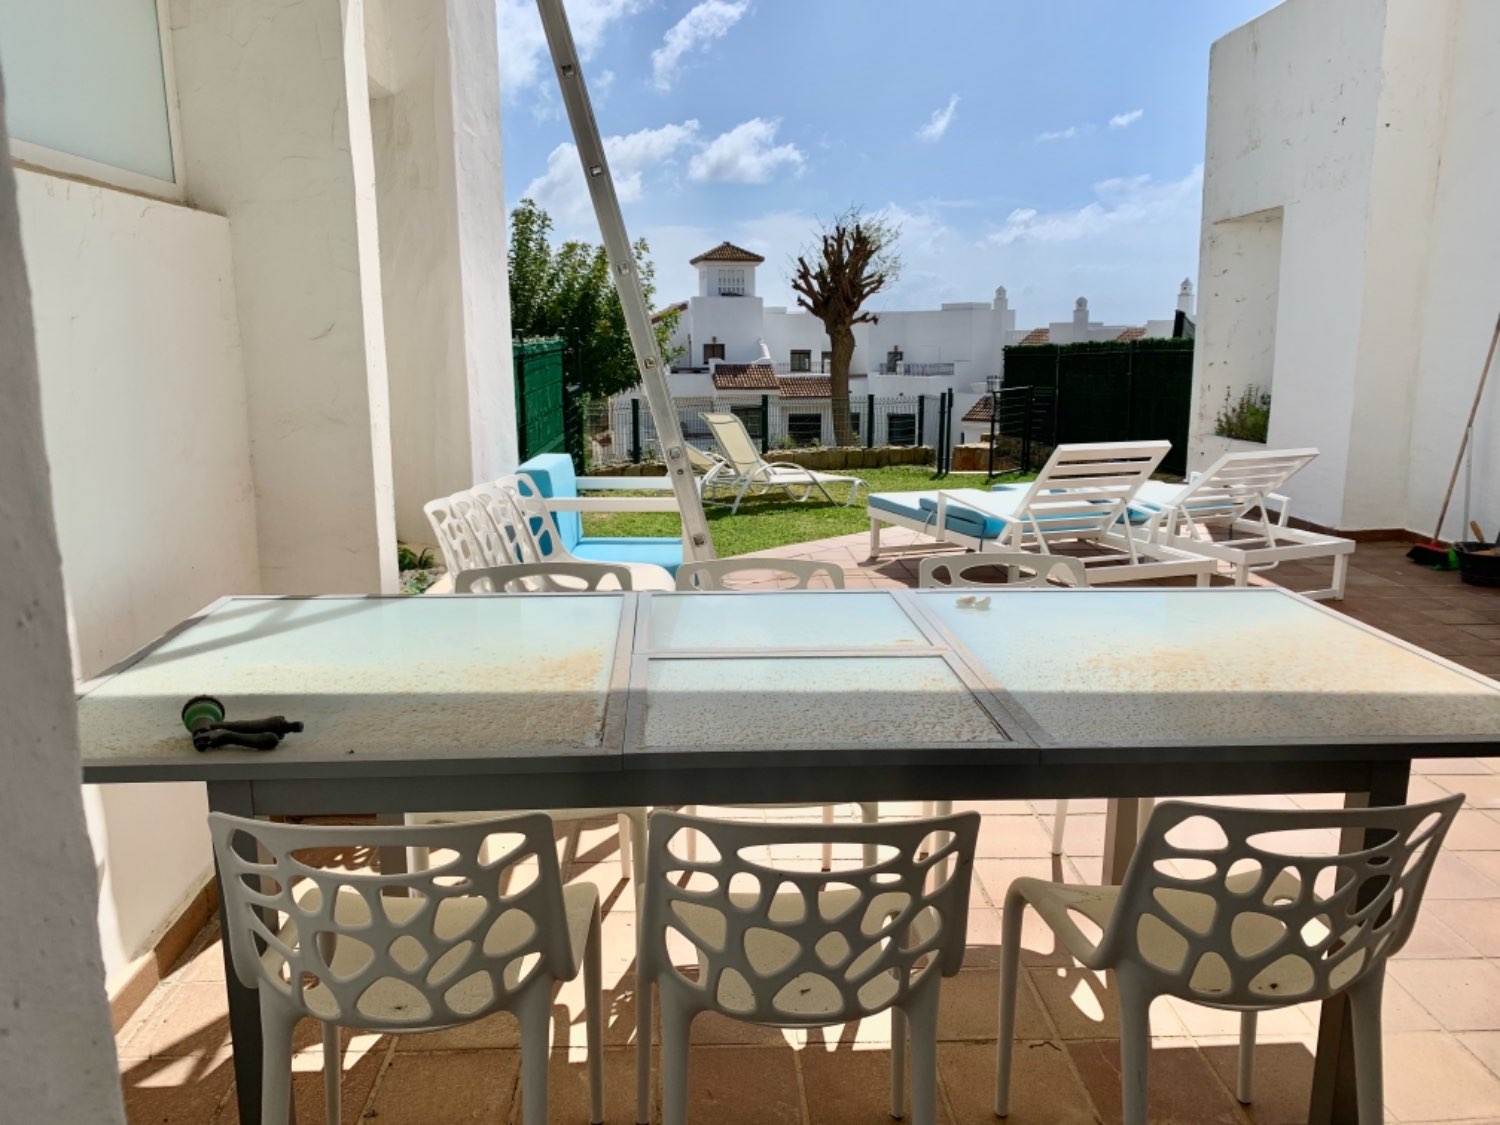 Charming four bedroom townhouse in Alcaidesa a few meters from the beach